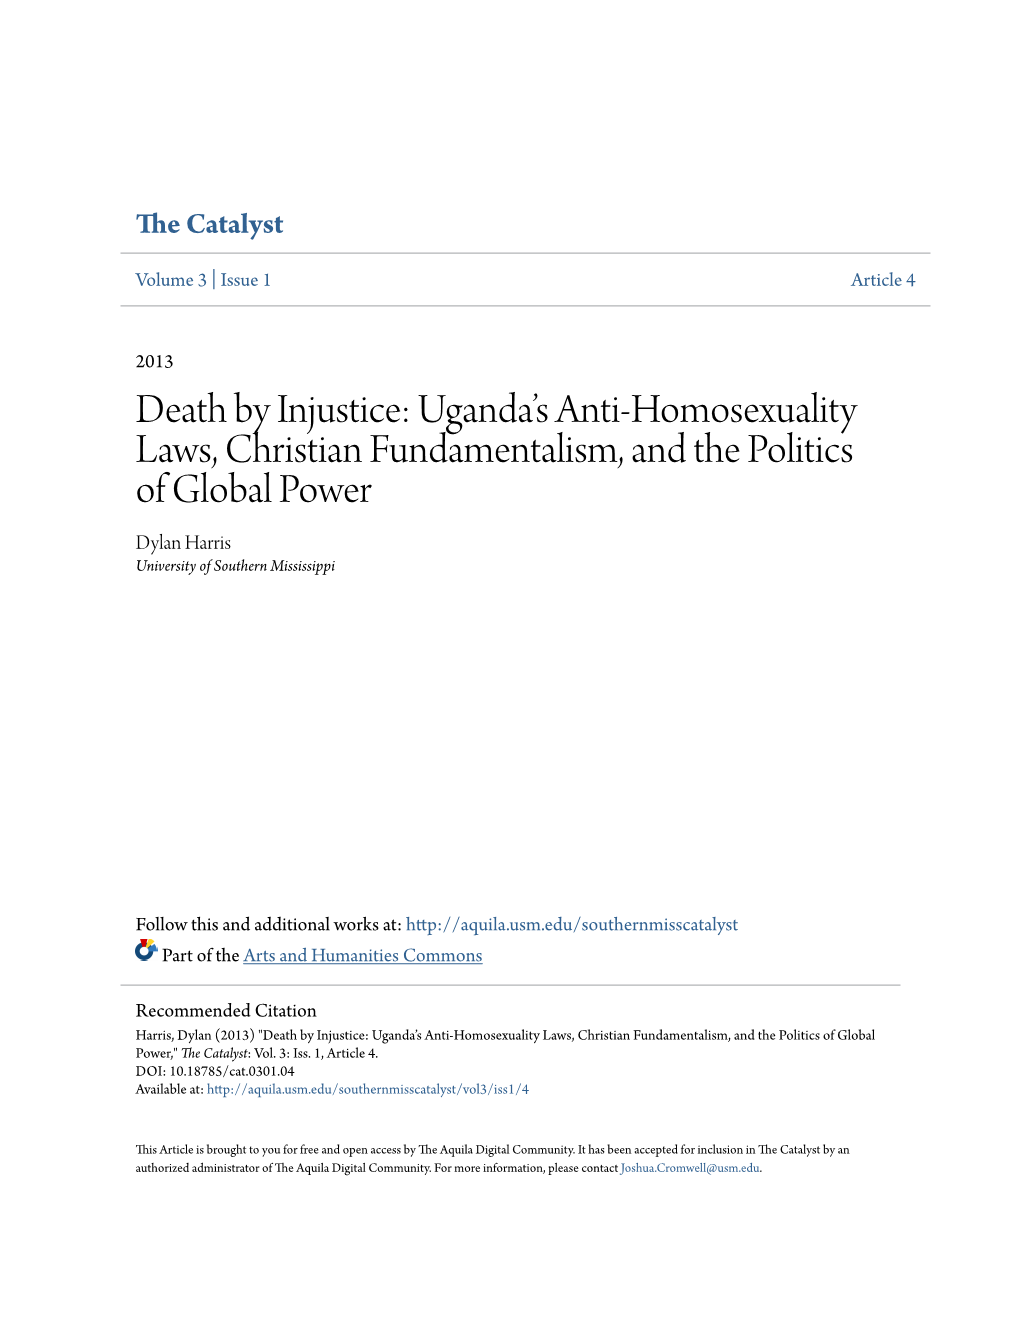 Death by Injustice: Uganda's Anti-Homosexuality Laws, Christian